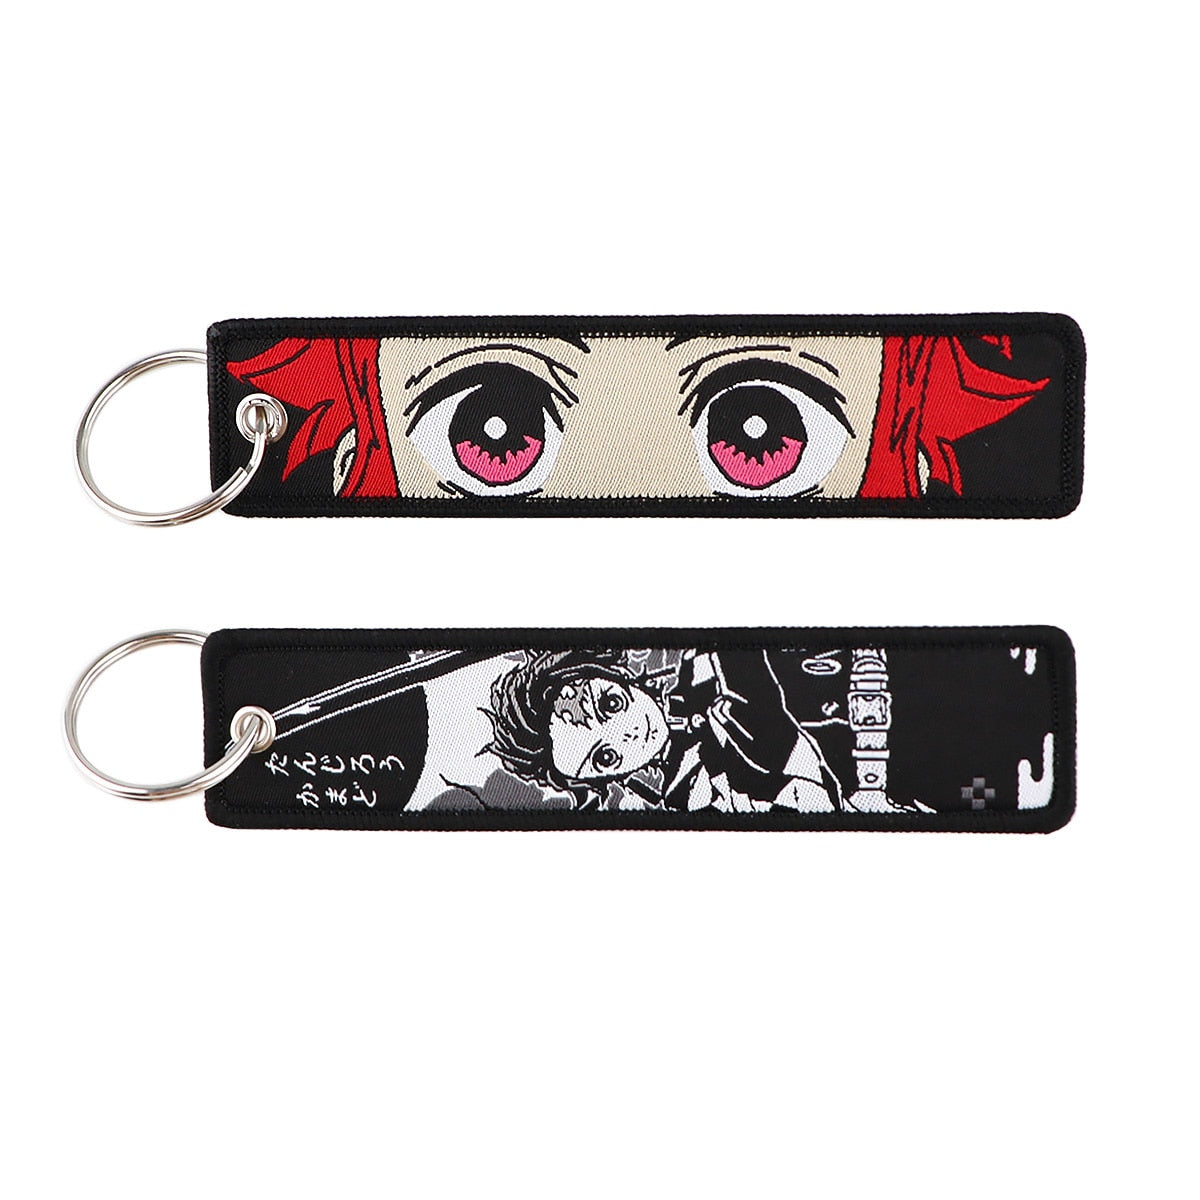 Anime Embroidery Keychain Key Ring 24